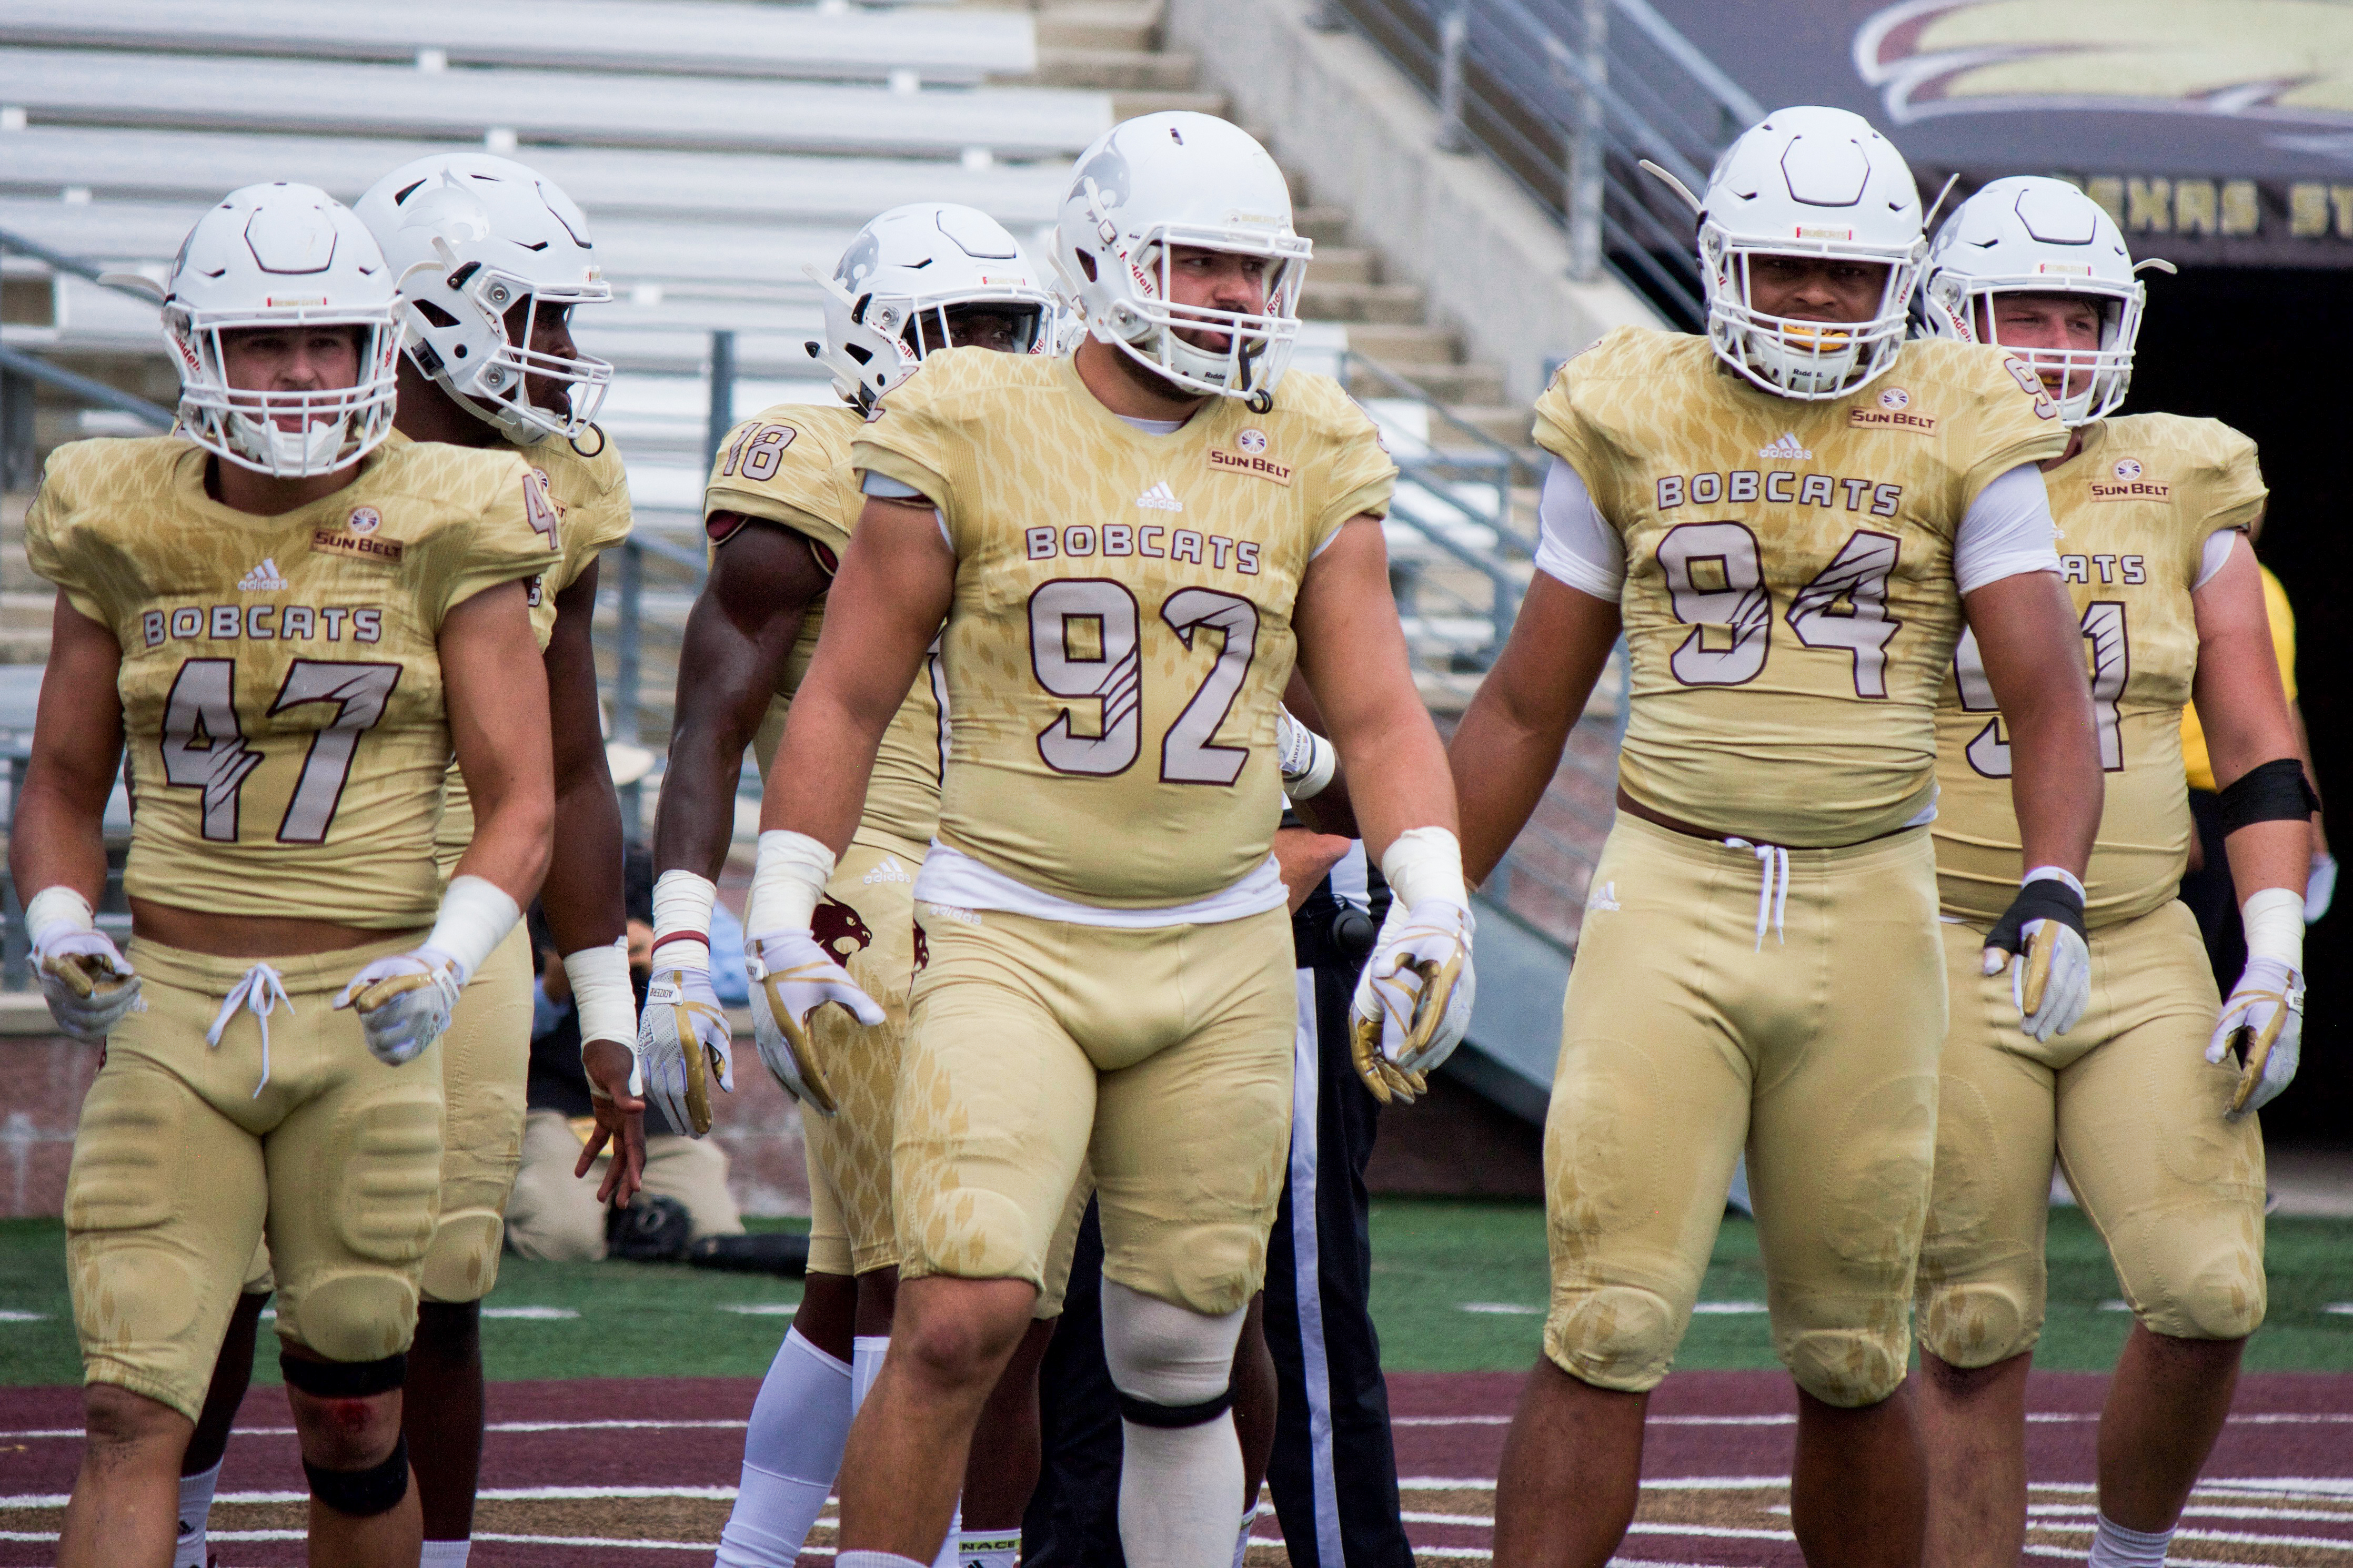 In golden uniforms, from left to right, number 47 A.J. Krawczyk, number 92 Grant Lanza, and number 94 Dean Taylor prepare to command the gridiron against ULM in the 2017 matchup. The defensive front will be seeking better results this season after losing 45-27 to the tune of a finesse, spread offense last season